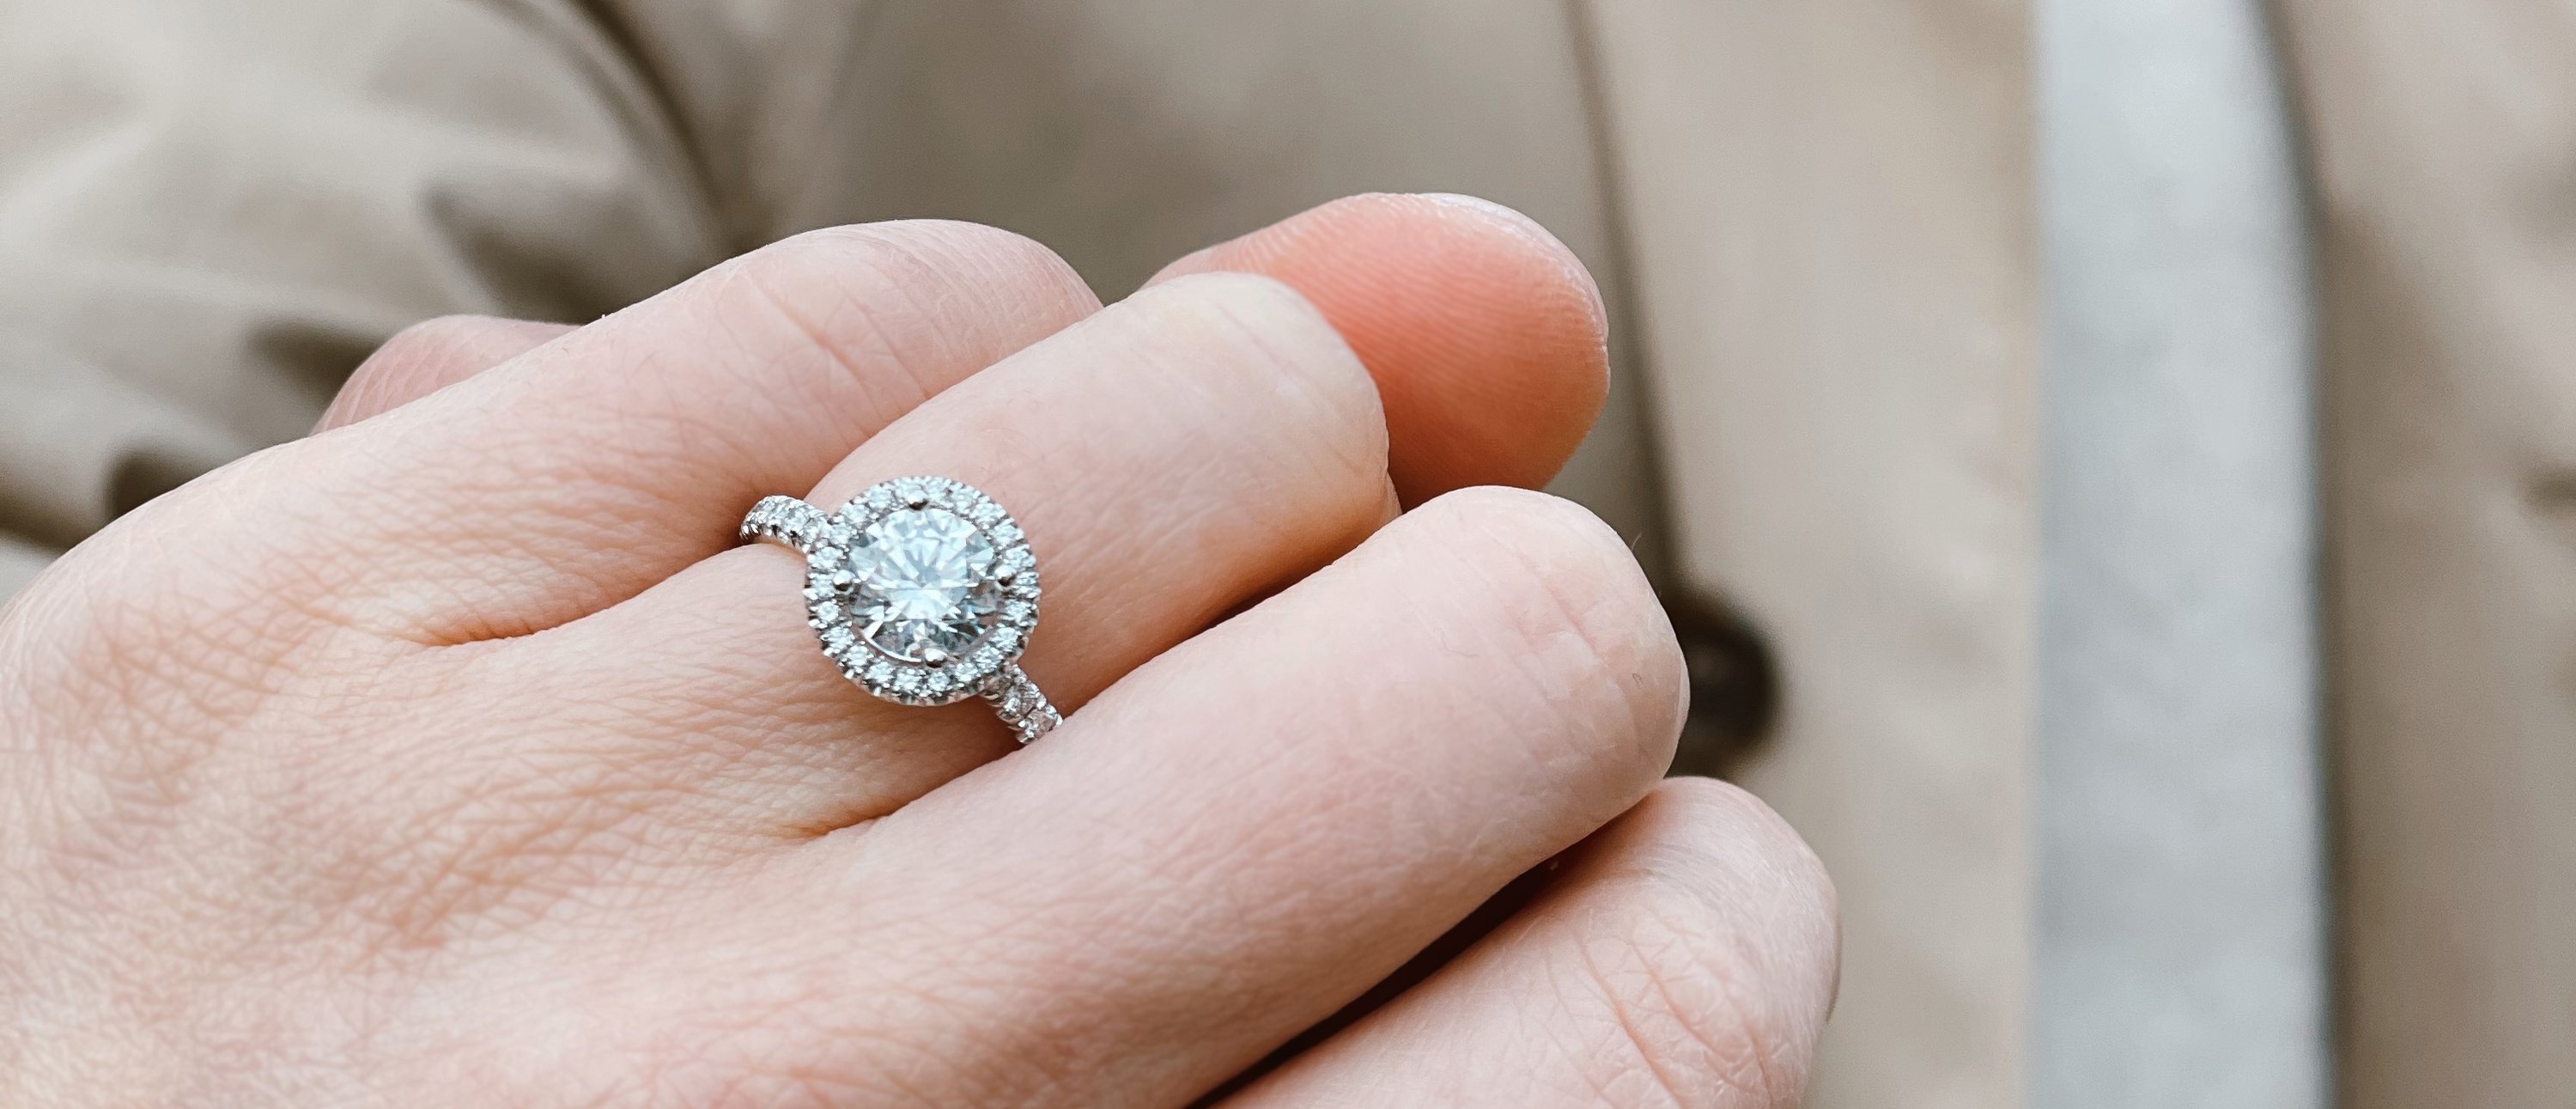 BAUNAT’s Engagement Ring Buying Guide: get great tips to buy an engagement ring! 